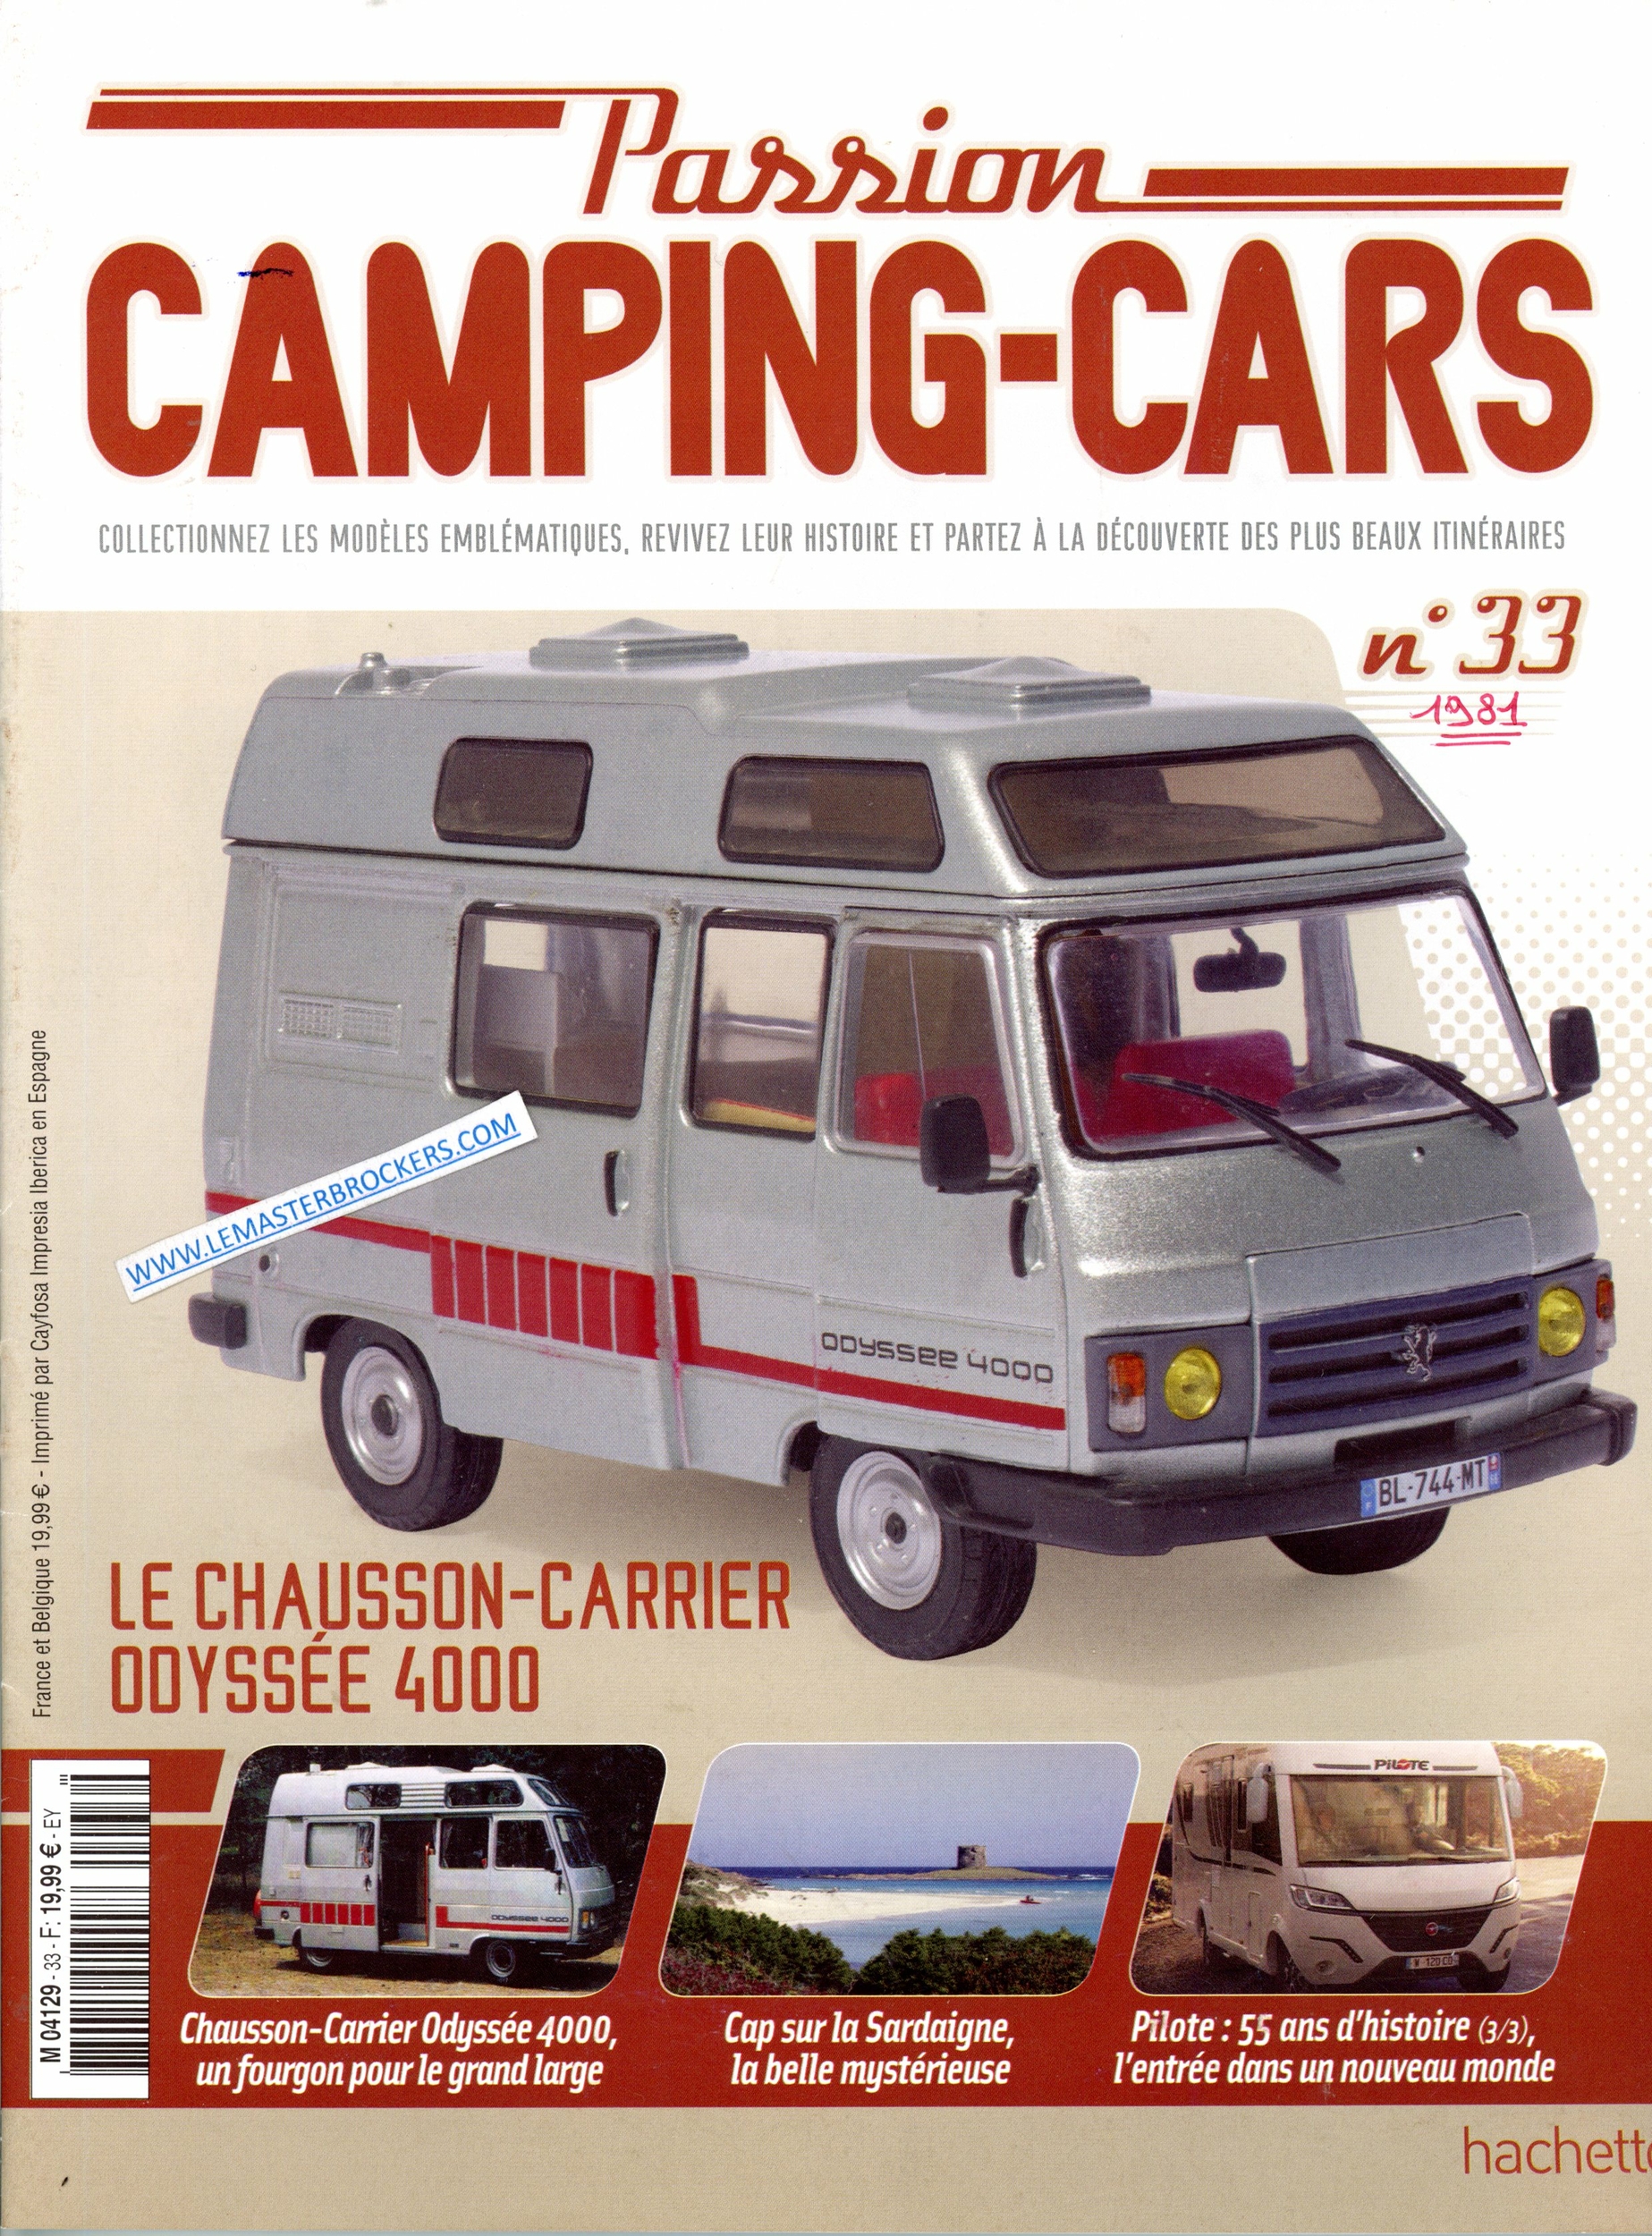 CHAUSSON CARRIER ODYSSEE 4000 ET ARTICLE PILOTE CAMPING-CARS